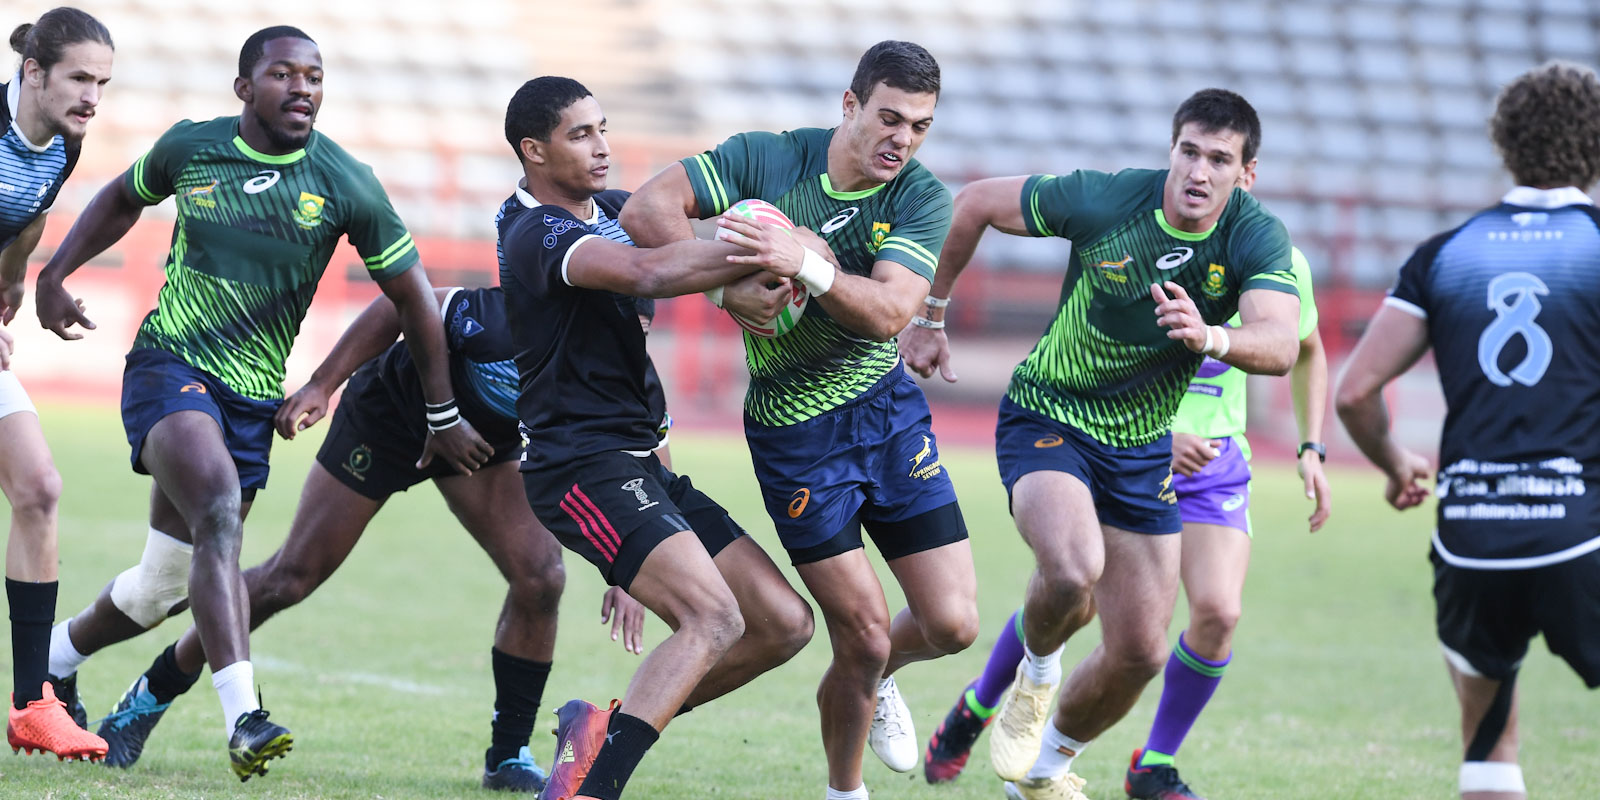 Muller du Plessis on the run, with Mfundo Ndhlovu (left) and Impi Visser (right) in close support.